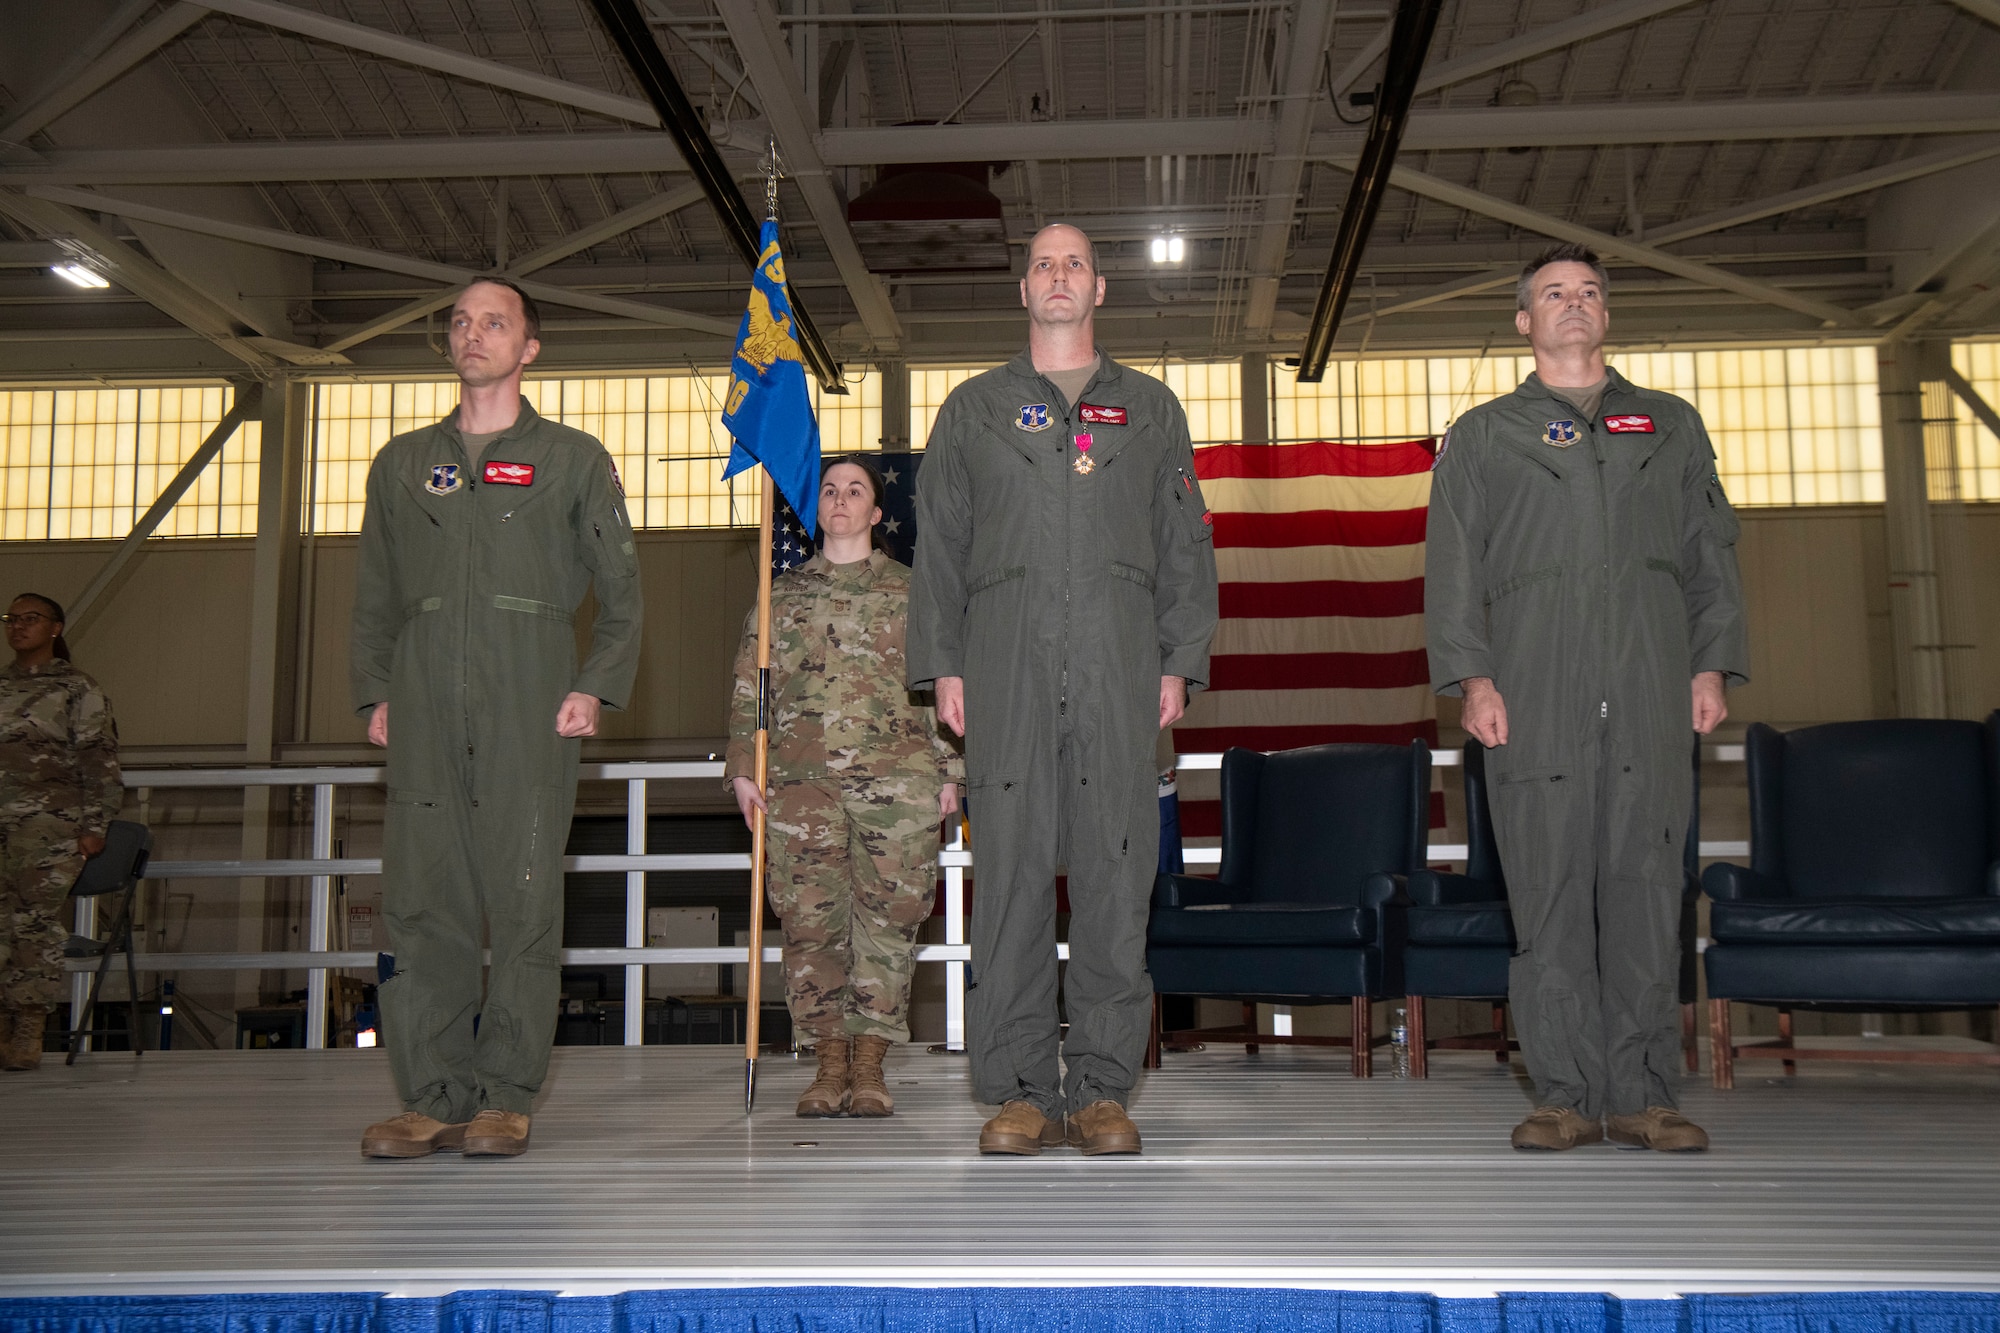 4 Air Force members standing at attention on stage